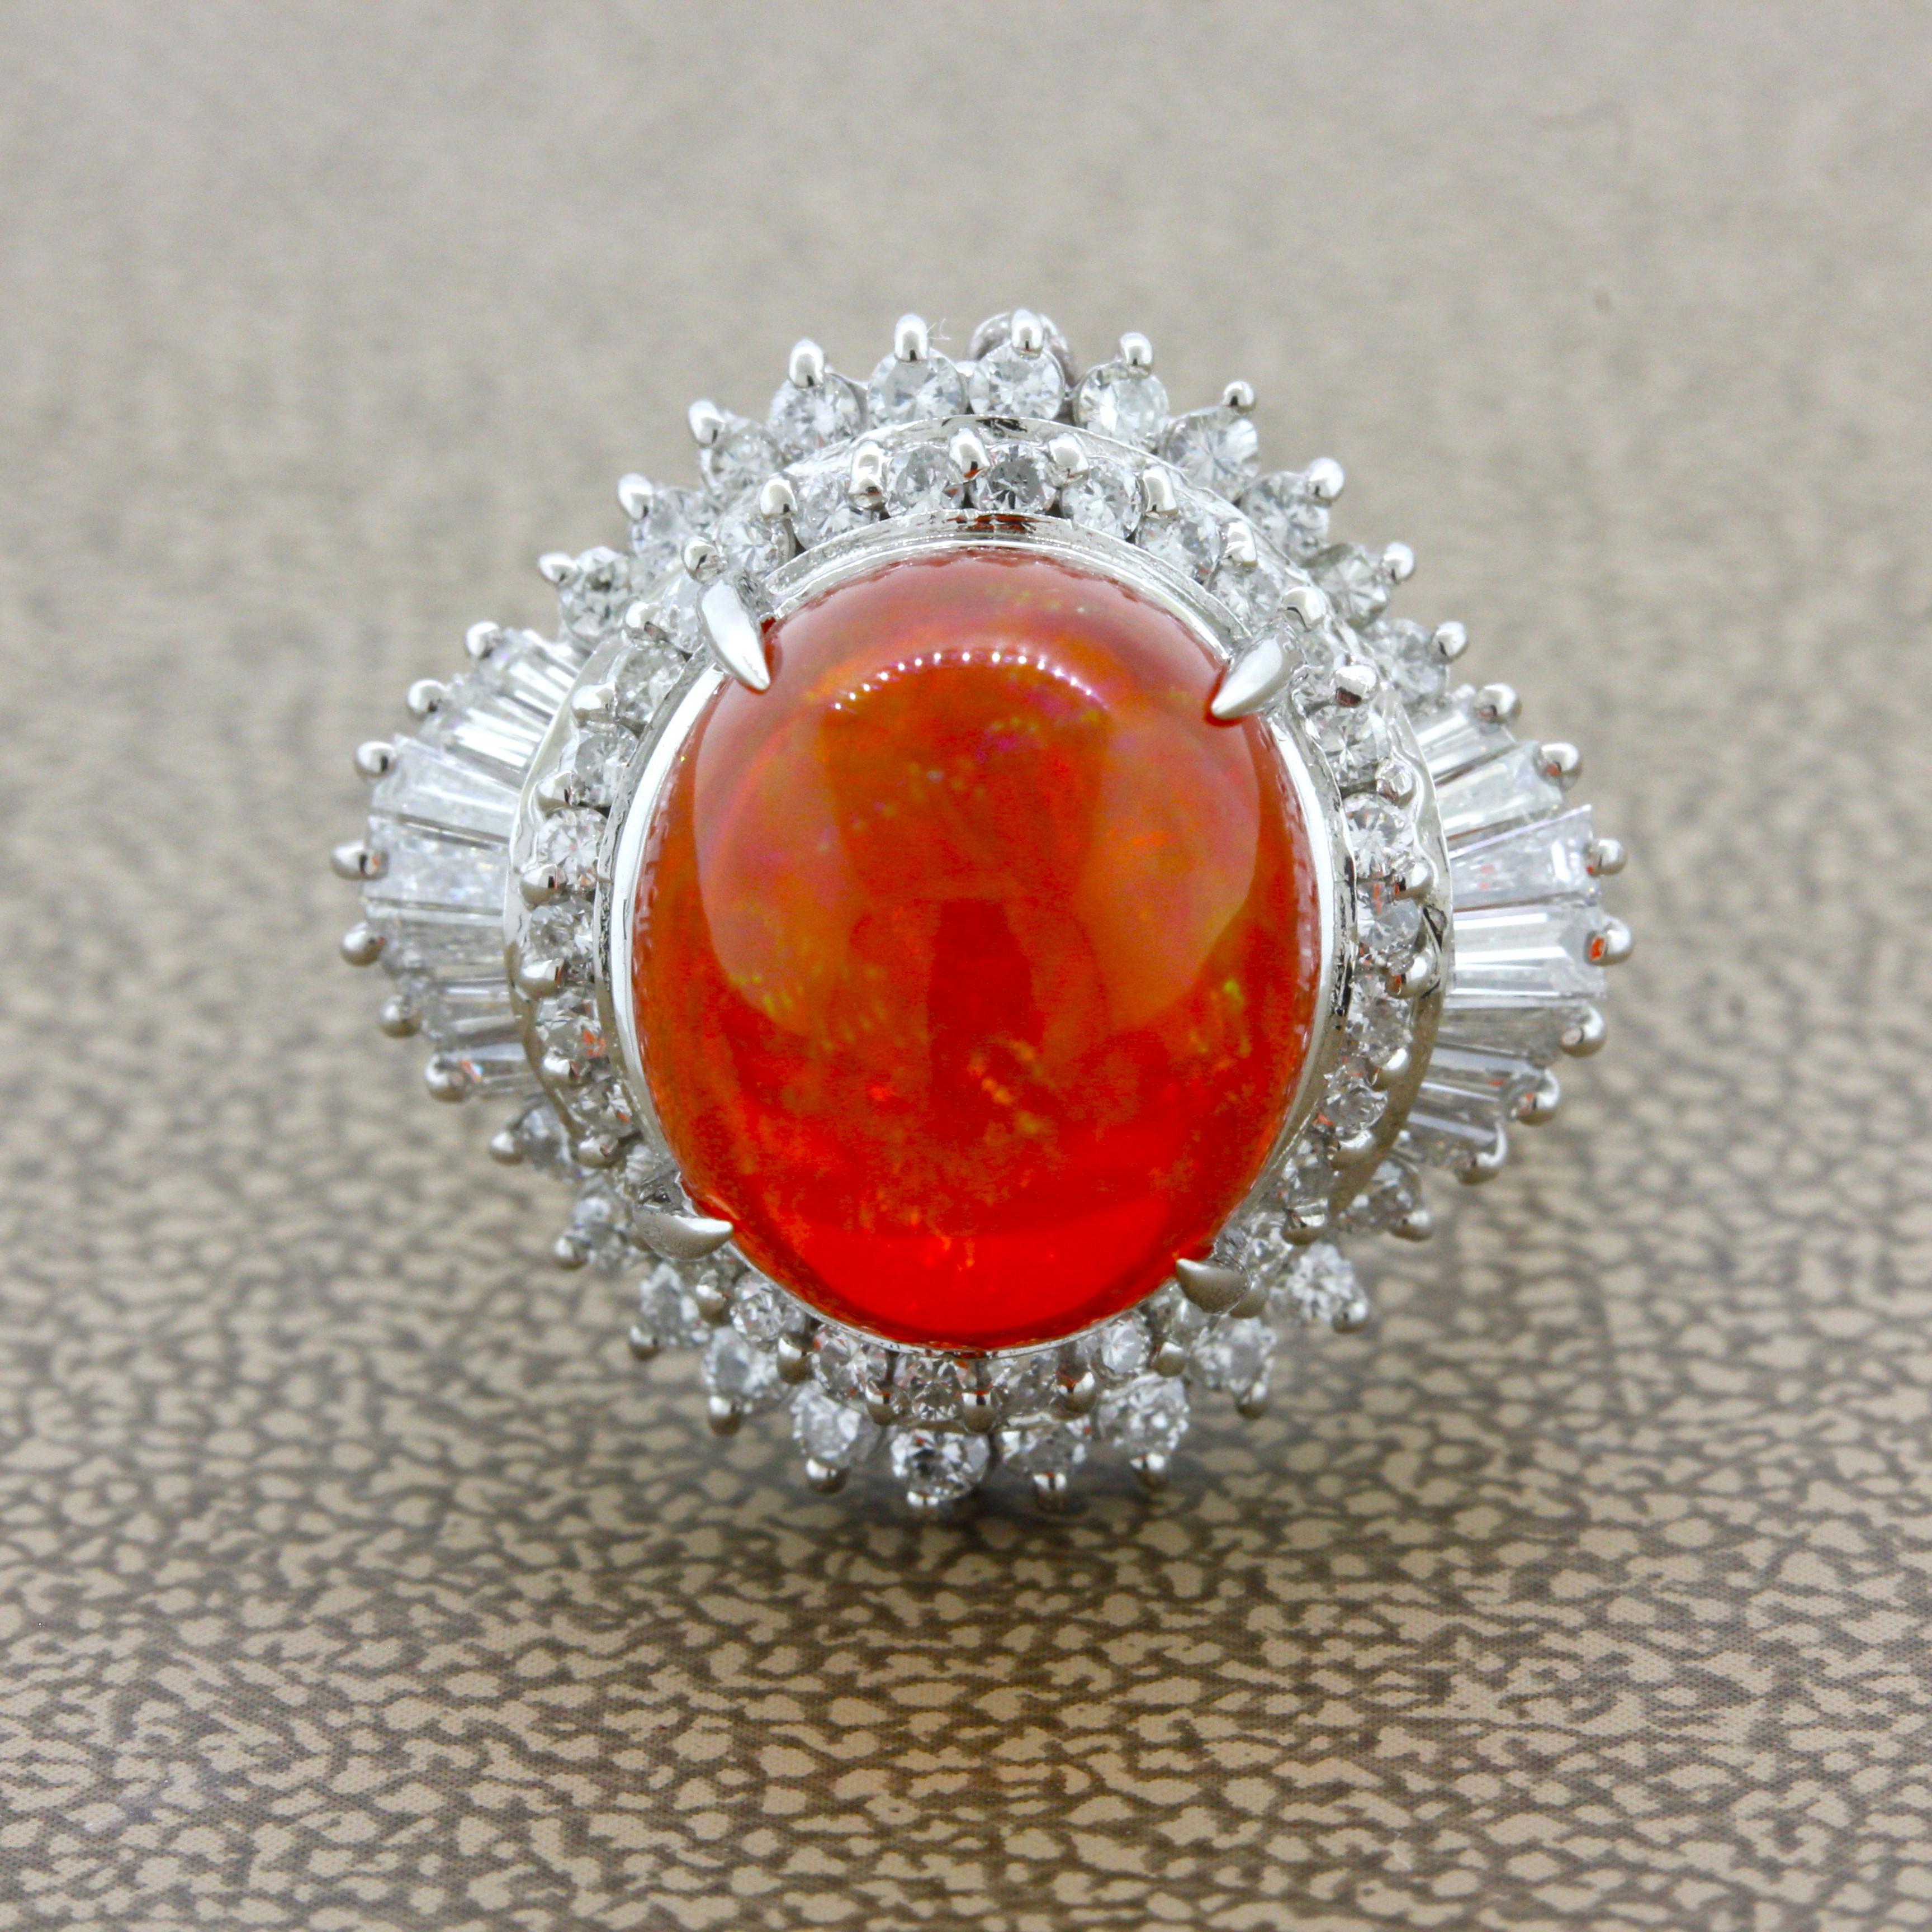 Here we have a very fine vivid jelly orange fire opal from Mexico which has excellent play-of-color. The opal weighs a respectable 7.14 carats and shows very strong bright color flashes on its top that include red, orange, yellow and green. It is